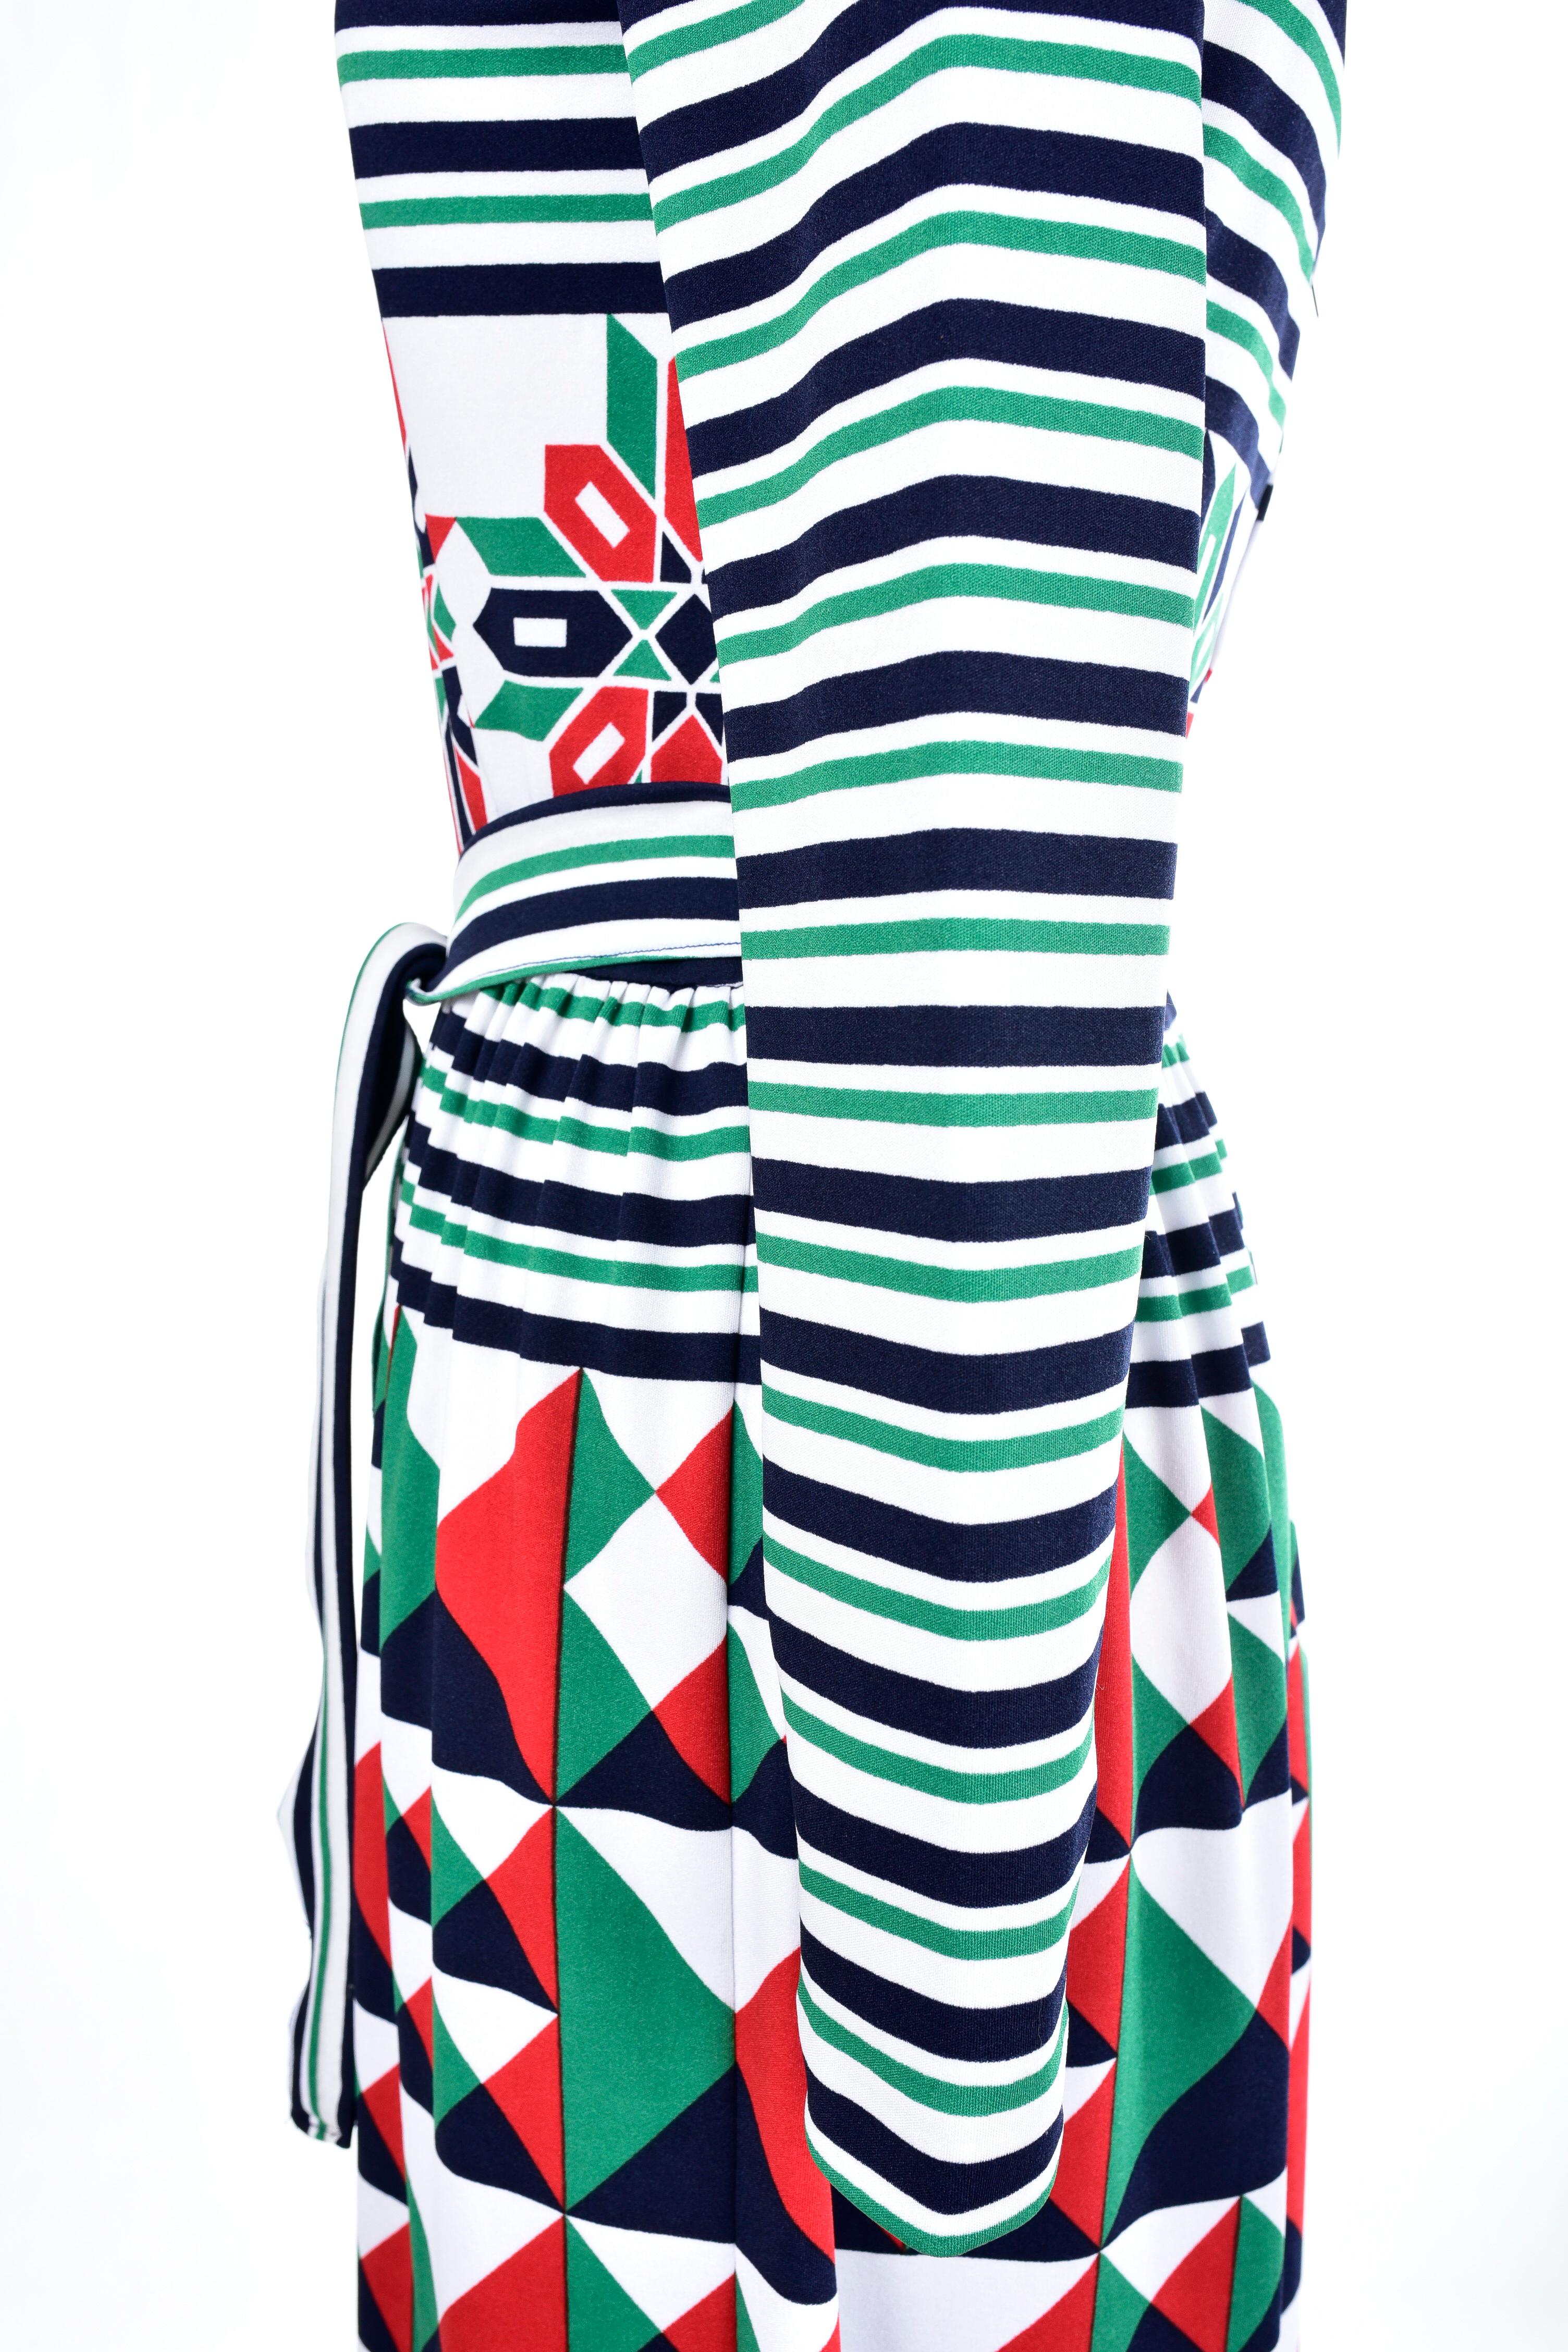 A Lanvin Printed Jersey Dress by Jules-François Crahay - France Circa 1972 For Sale 4